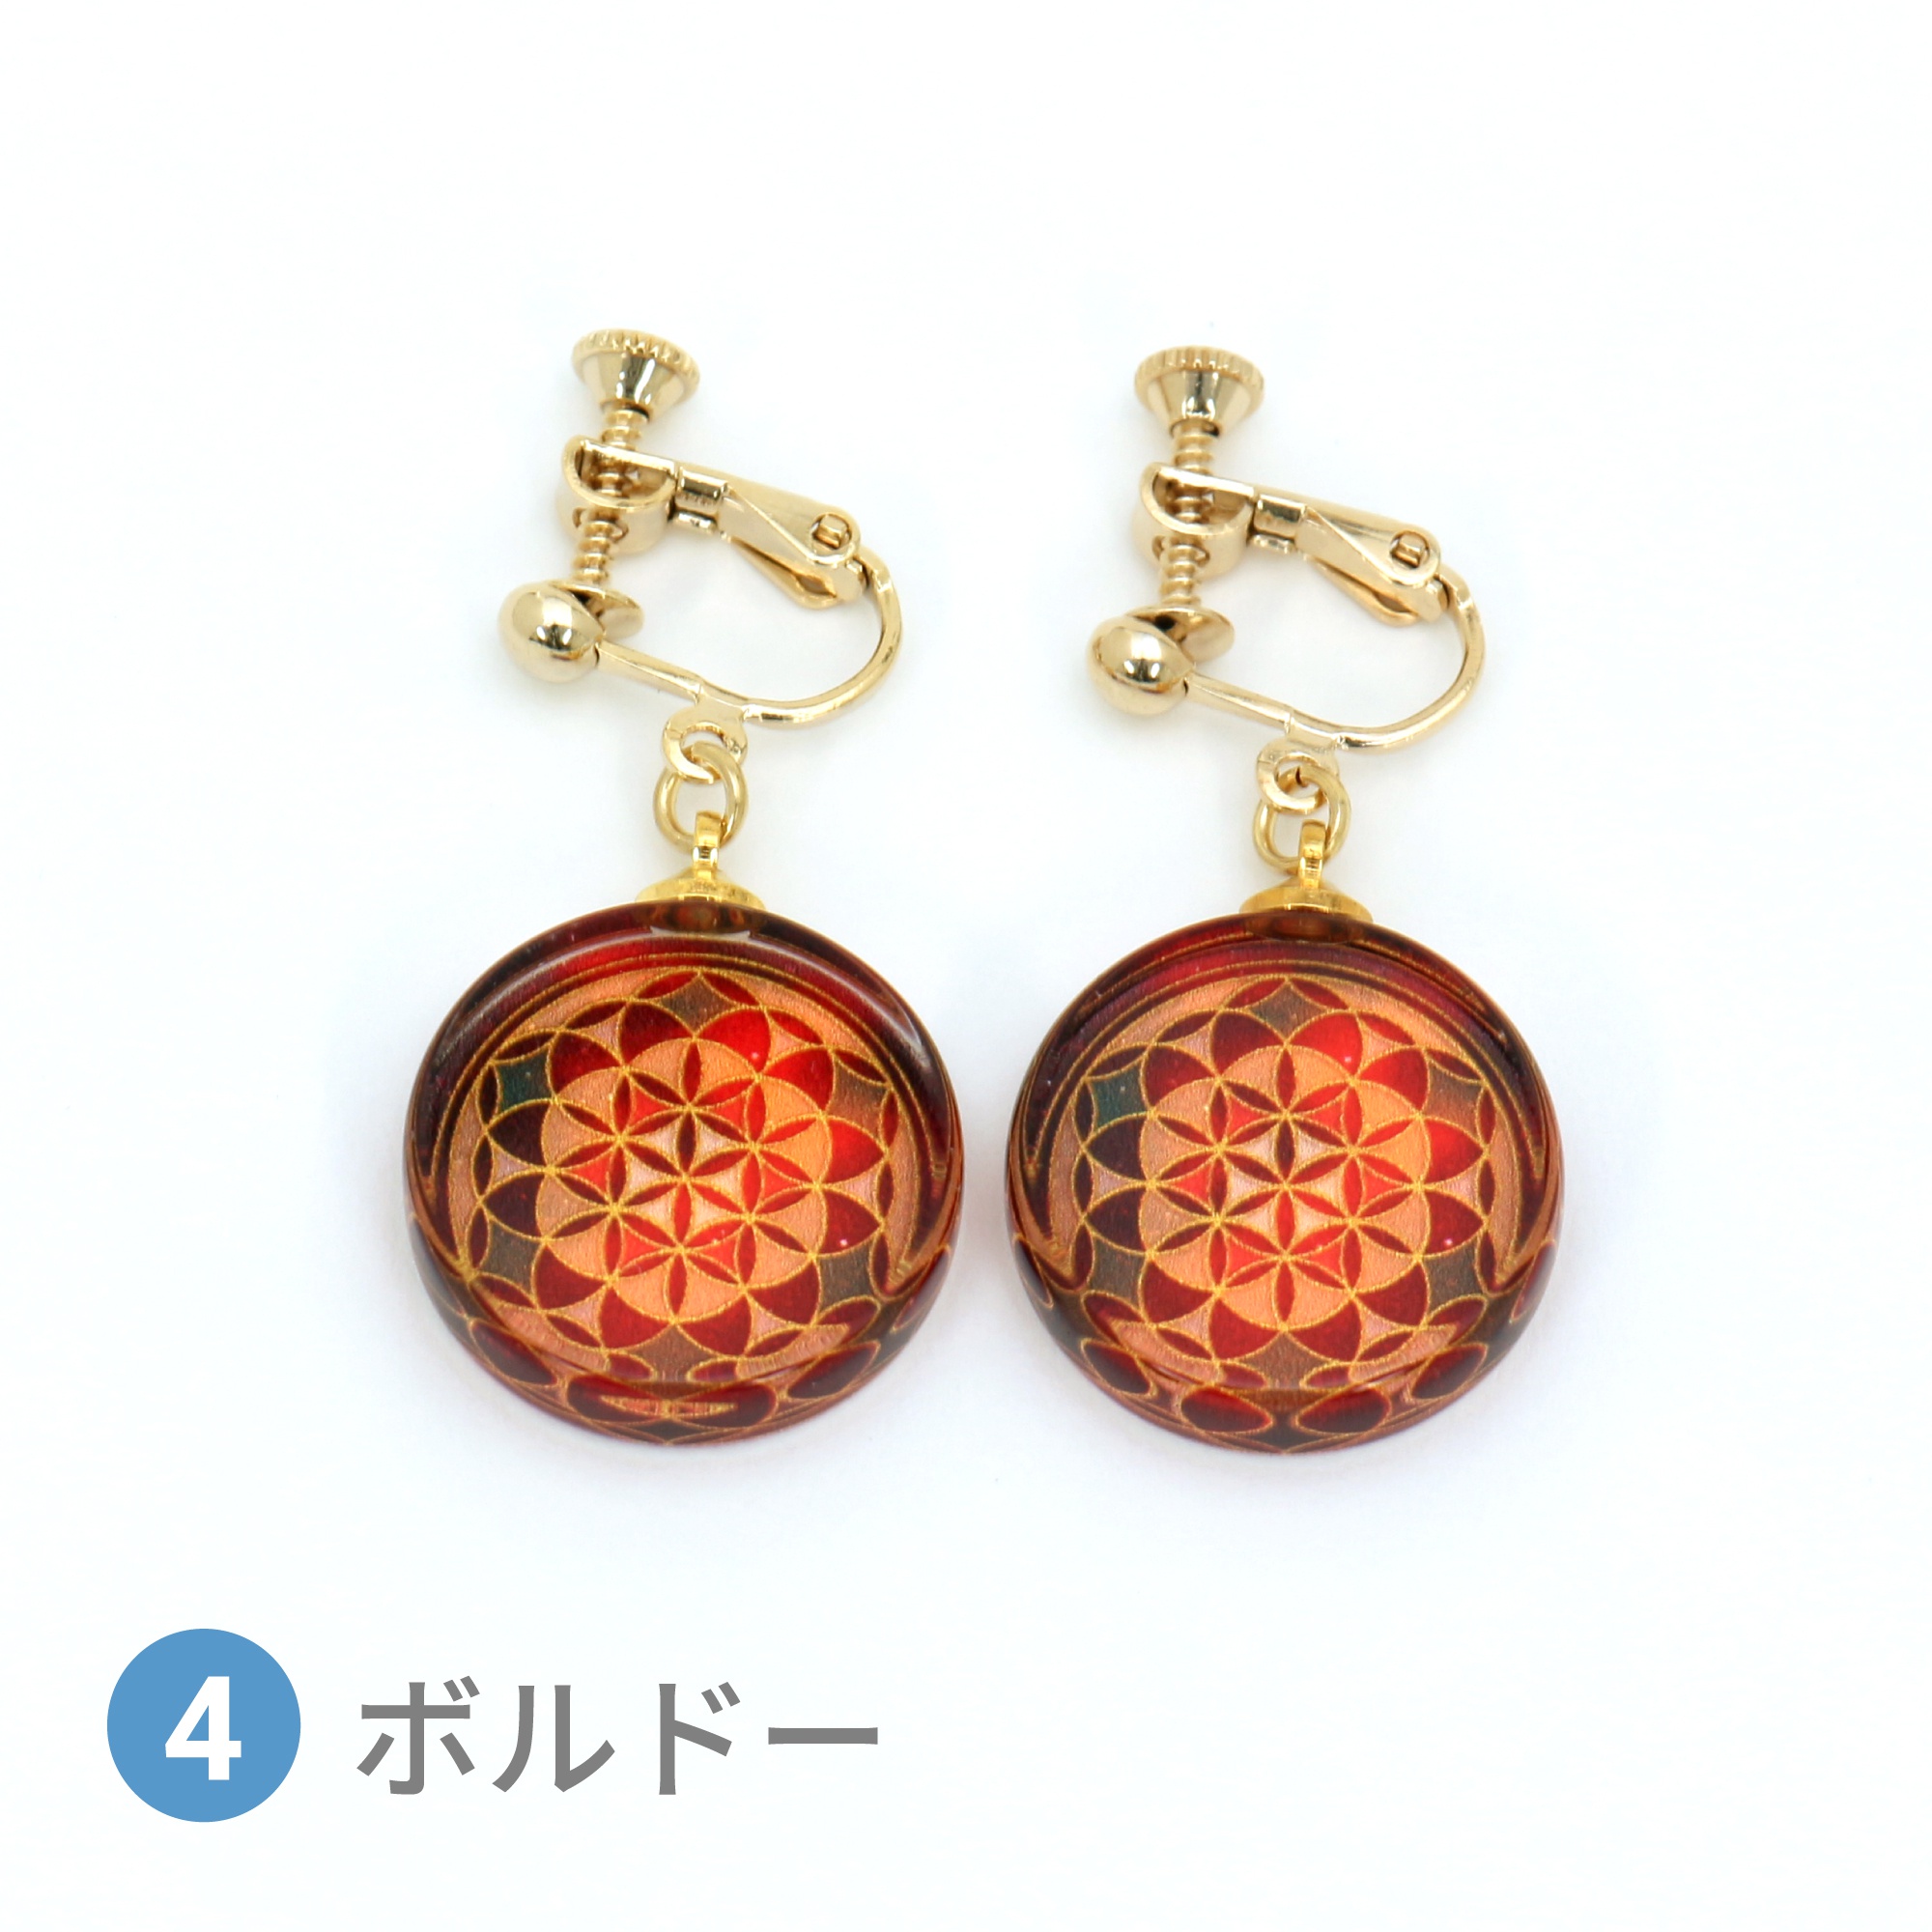 Glass accessories Earring FLOWER OF LIFE bordeaux round shape